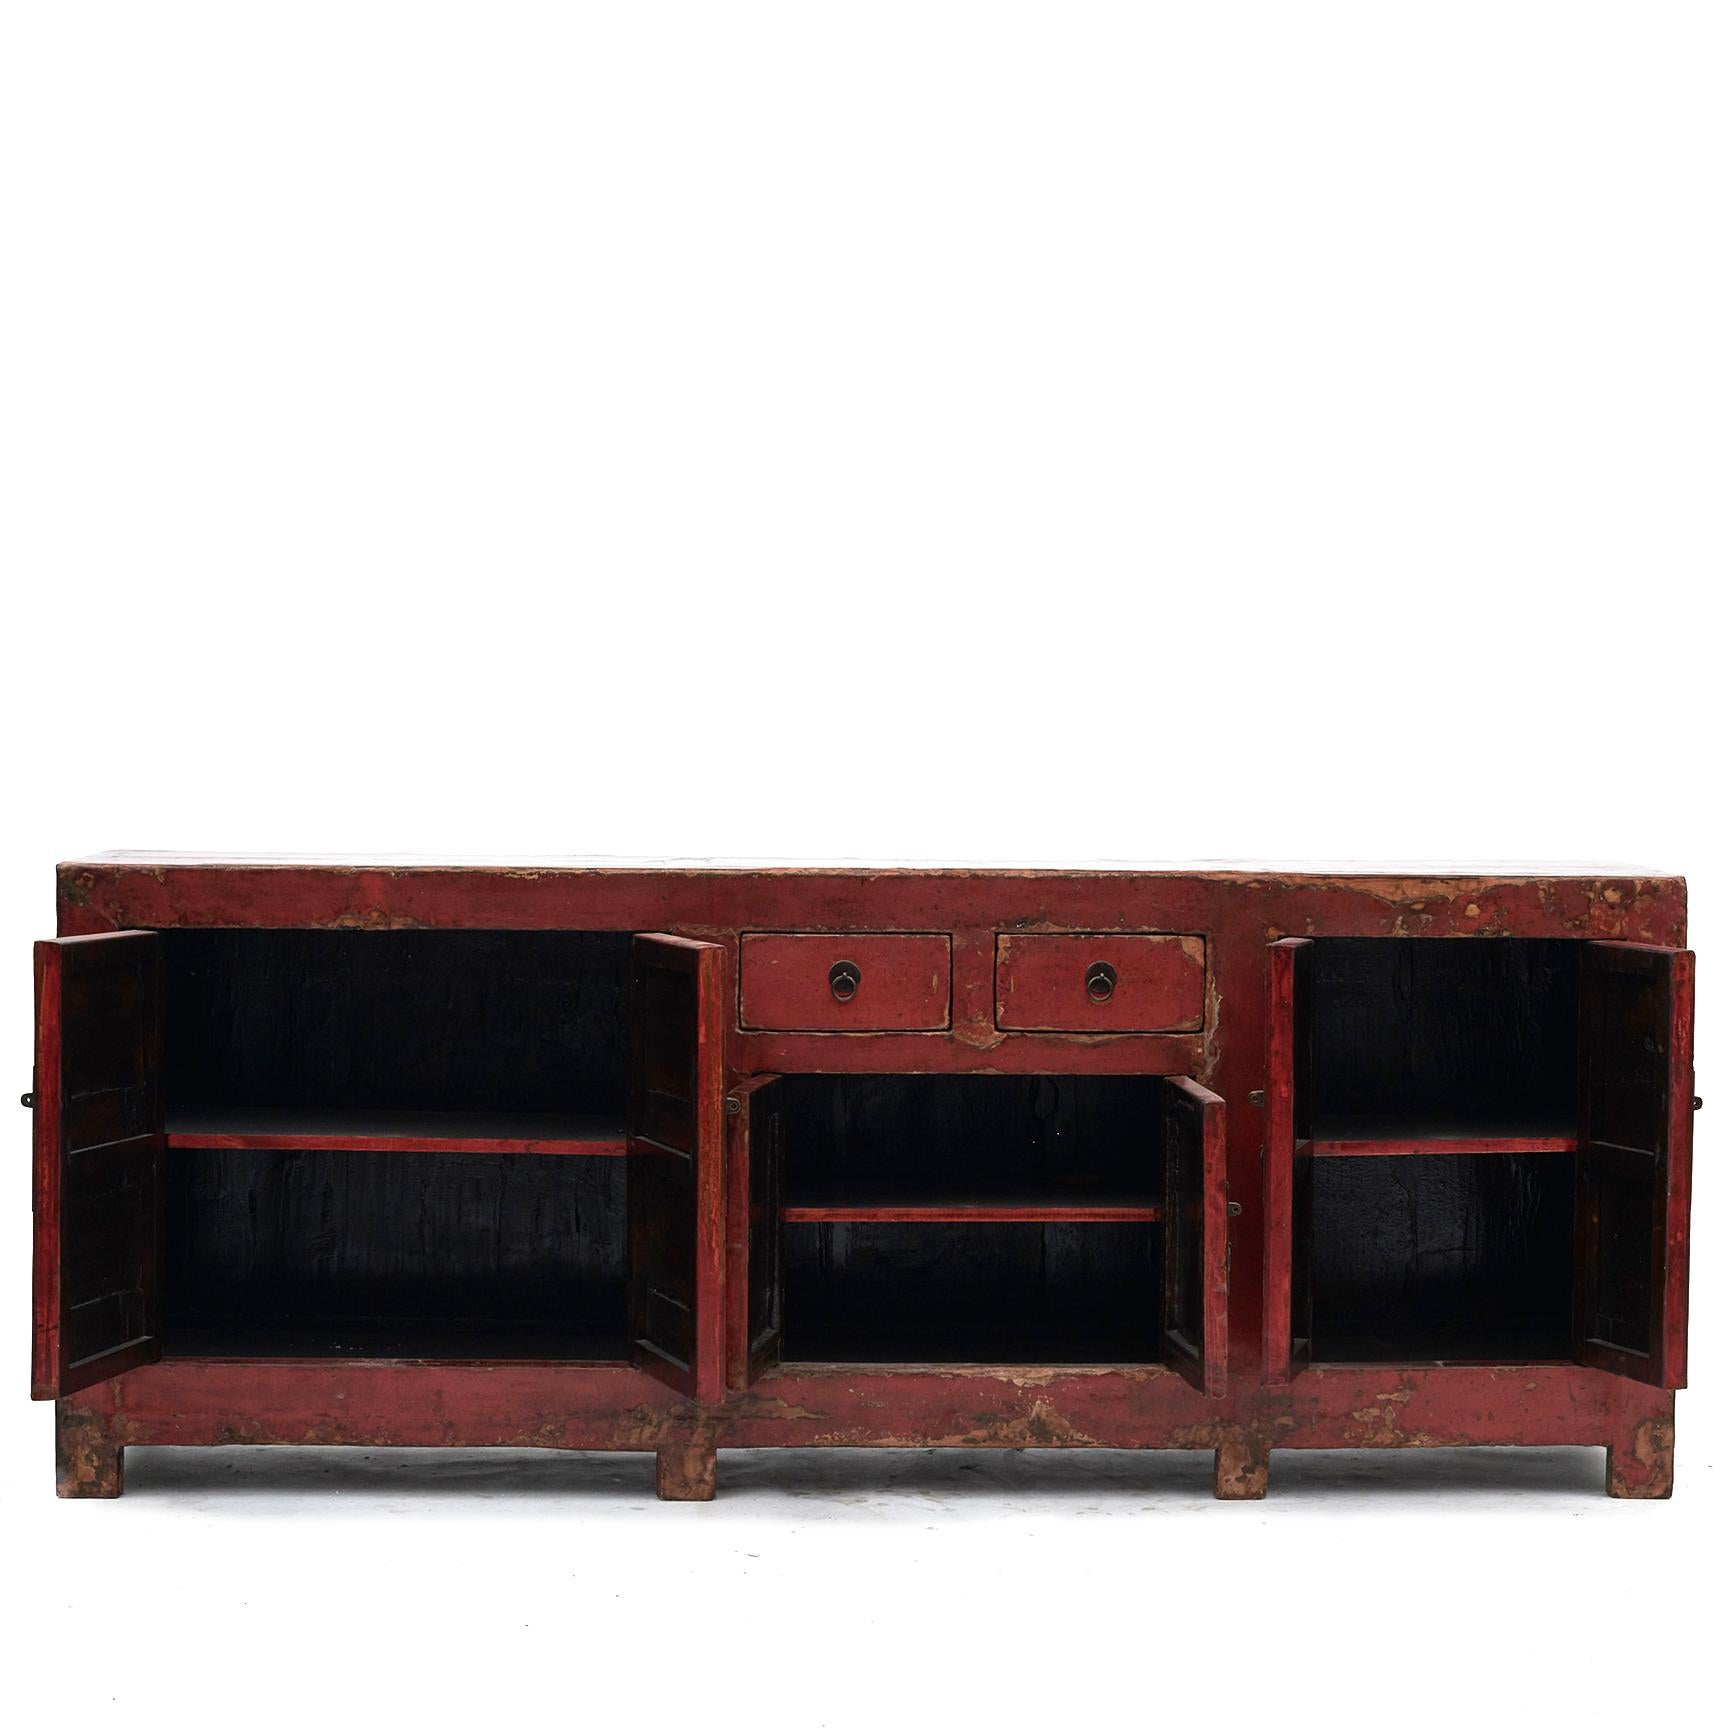 Large sideboard (W: 237,5) with three pairs of doors, above the doors in the middle a pair of drawers. The sideboard has a original thick red lacquer on the front/ top and black lacquer on the sides.
The natural wear gives a charm and character,